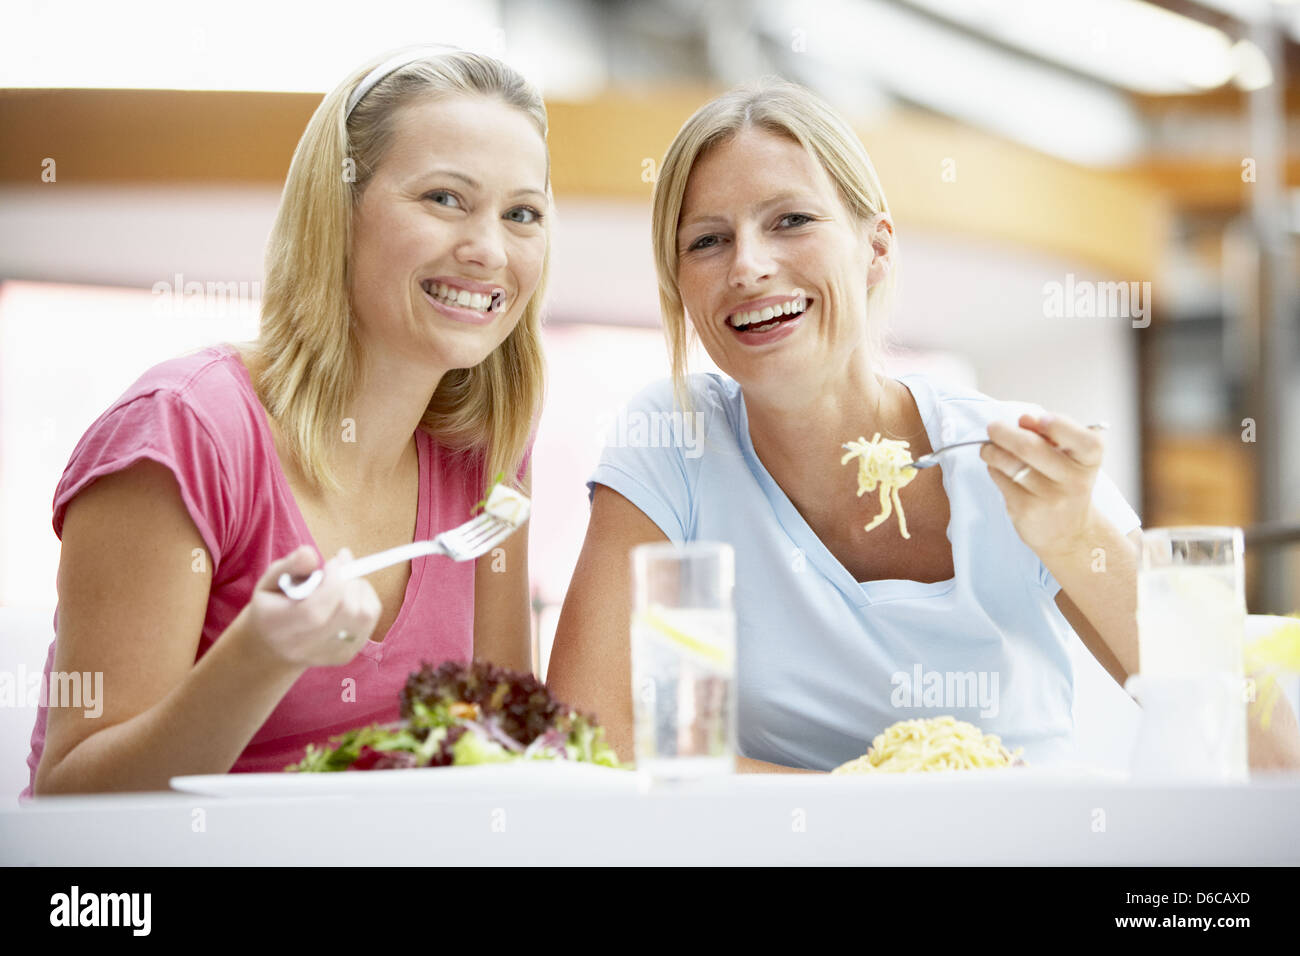 woman,eating,lunch break,lunch Stock Photo